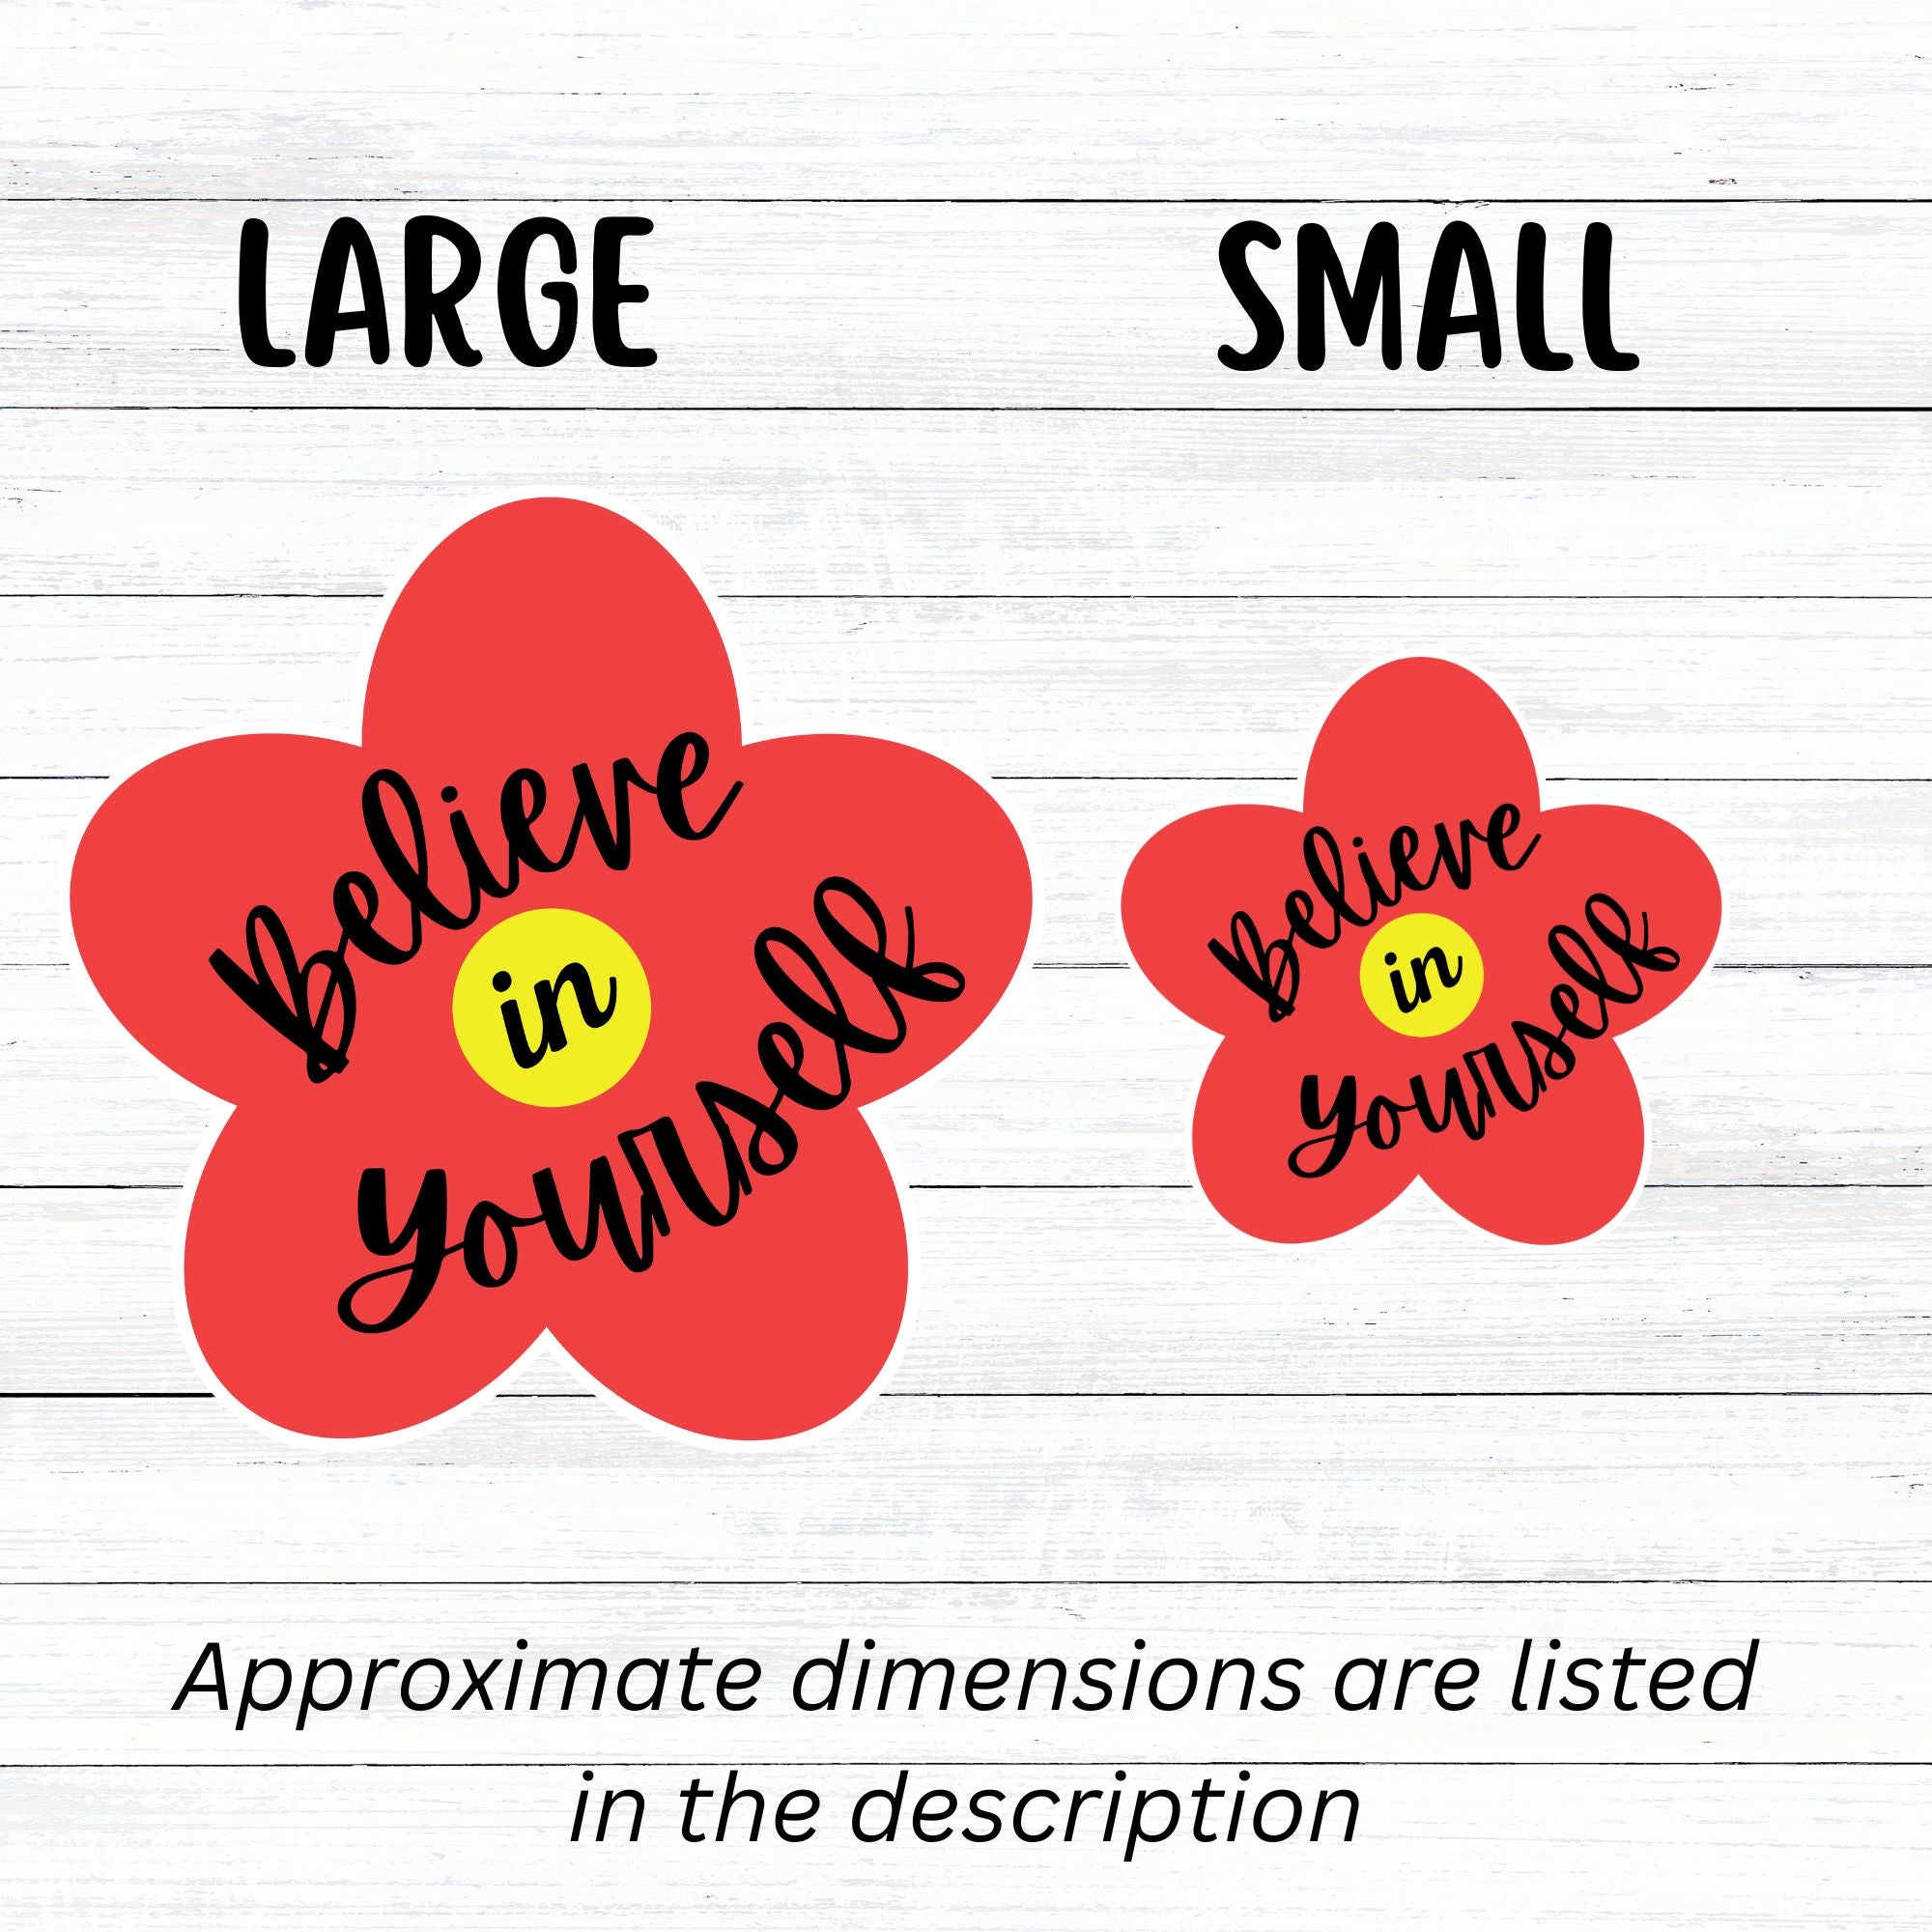 This inspirational individual die-cut sticker features a red flower with a yellow center, with the words Believe in Yourself written across it. Check out our Inspirational collection for more inspiring stickers! This image shows large and small Believe in Yourself stickers next to each other.